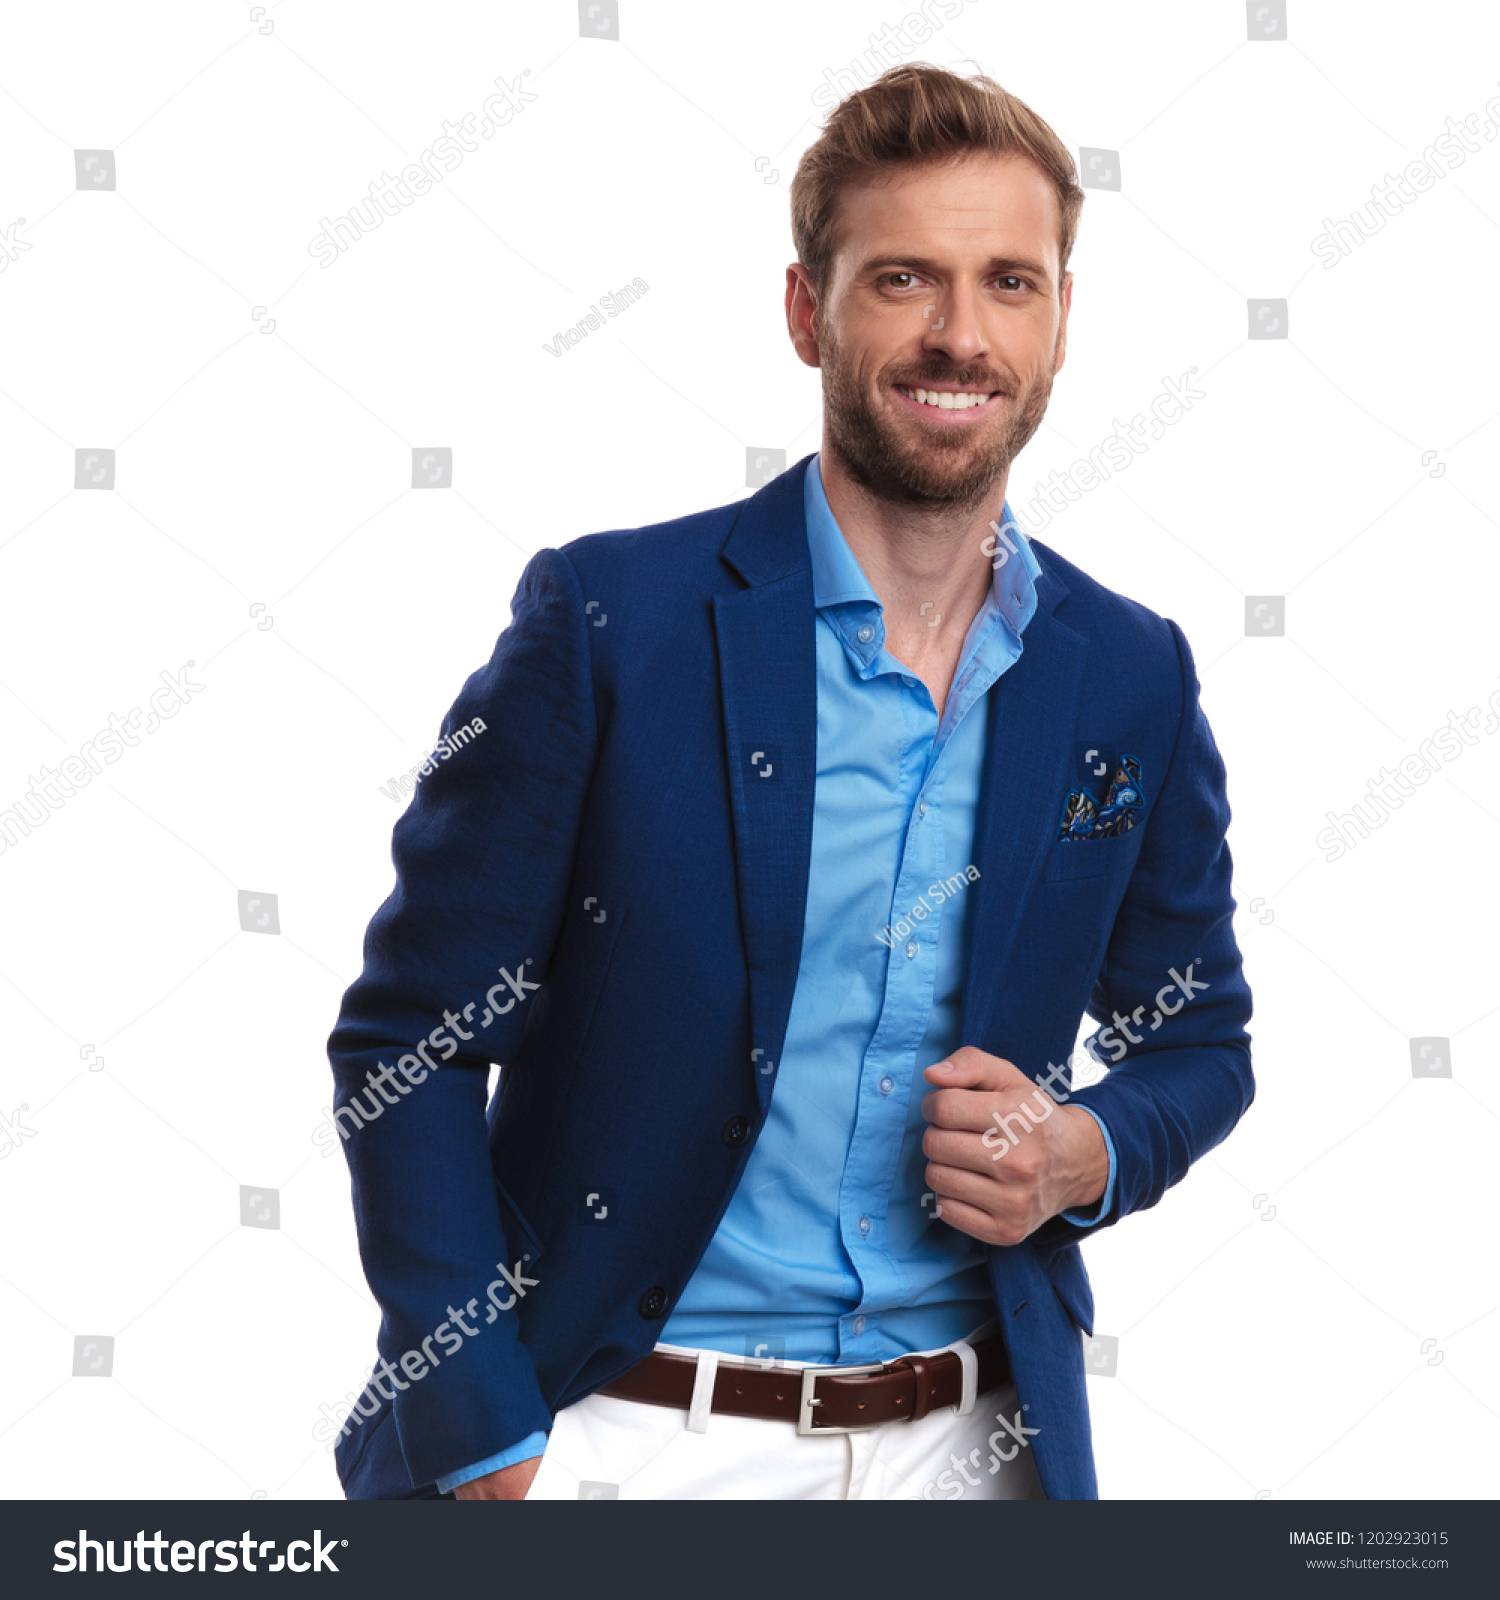 relaxed happy smart casuam man posing on white background #1202923015